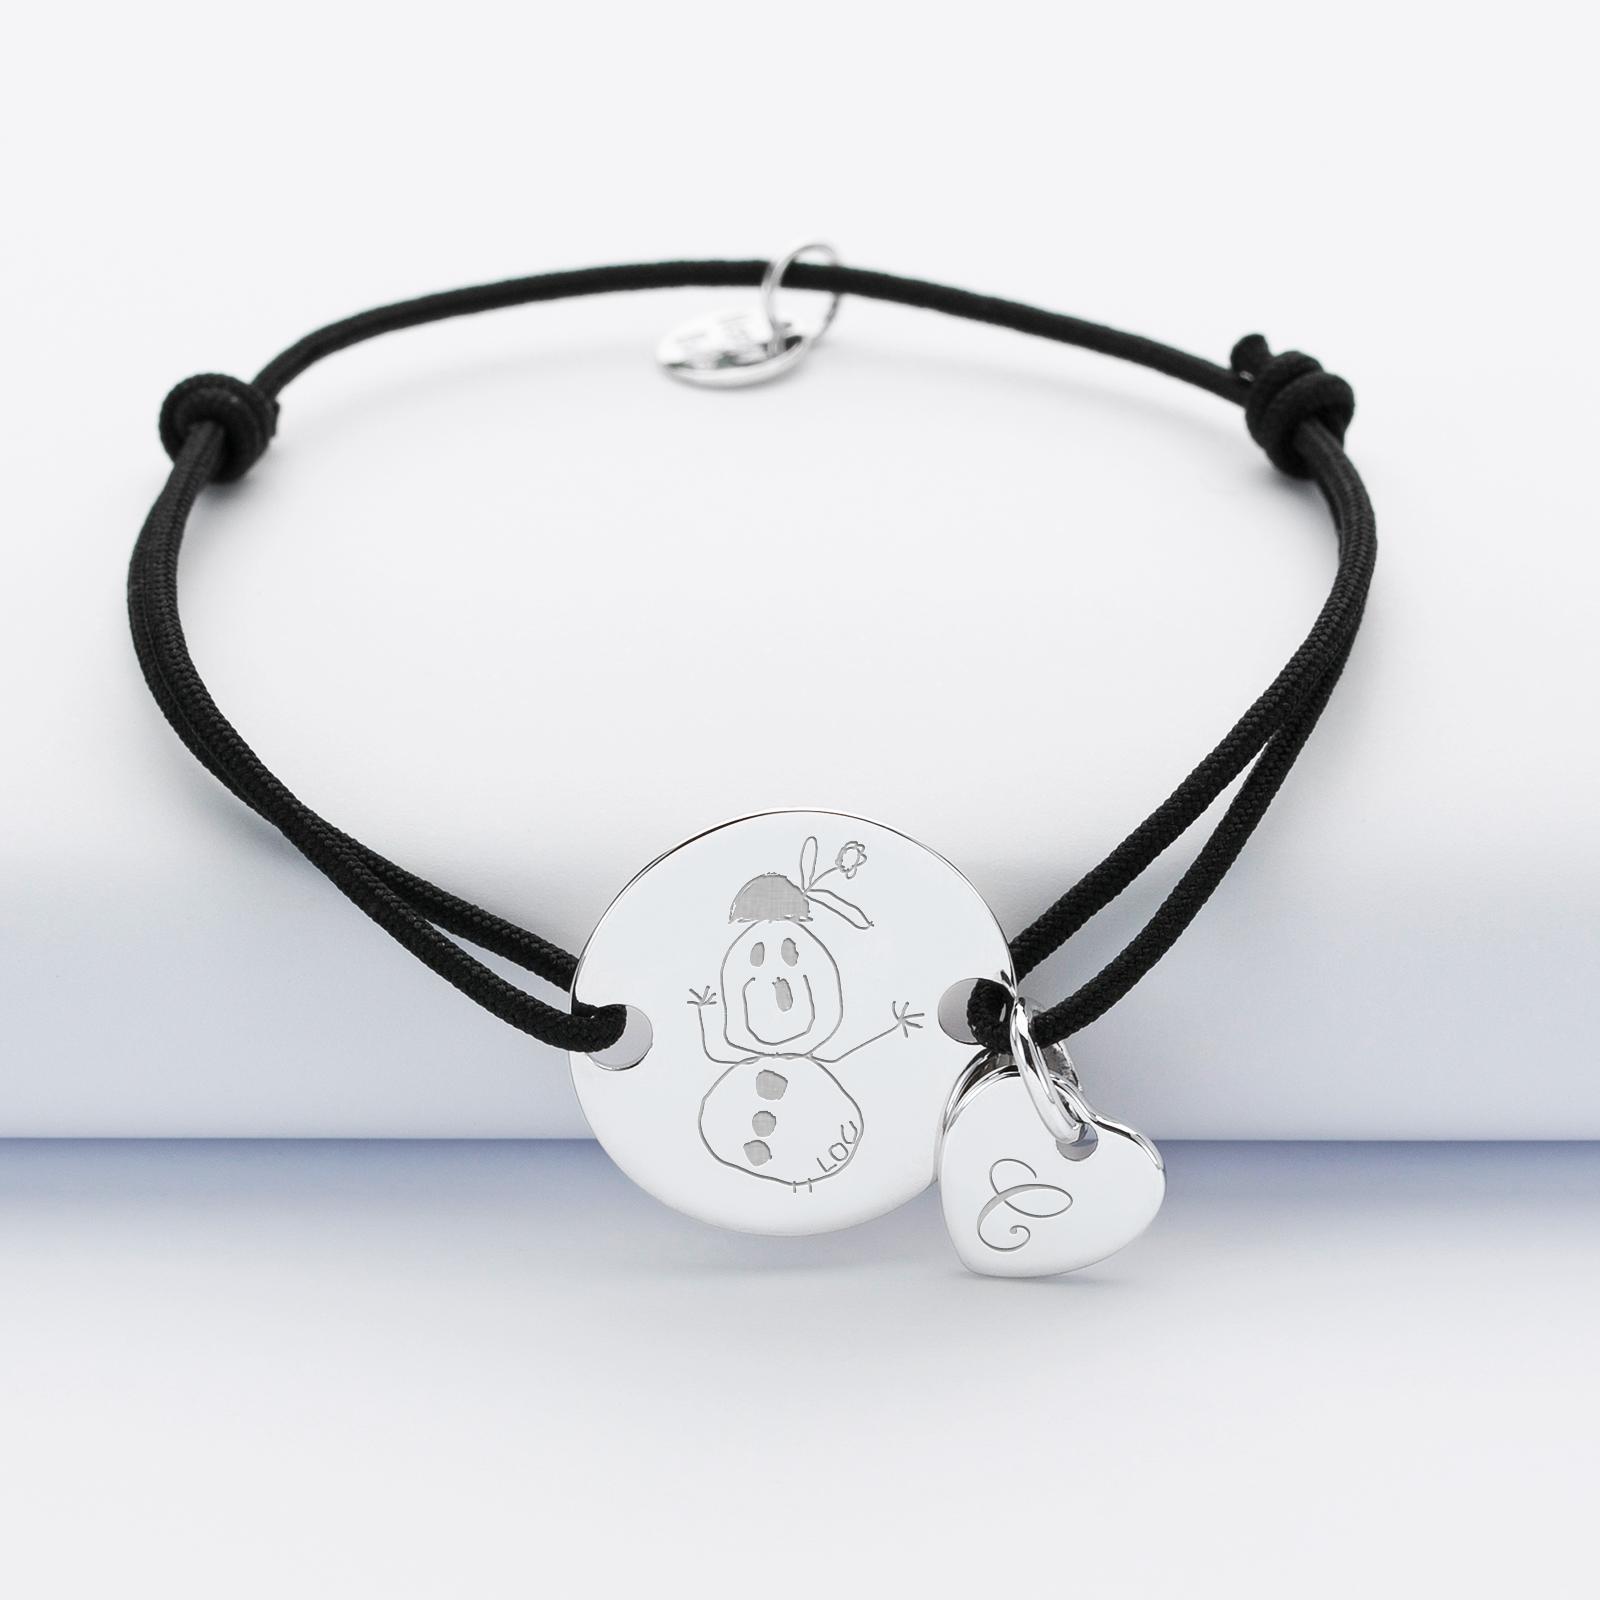 Personalised engraved silver 2-hole target medallion bracelet 20mm and heart charm 10mm sketch